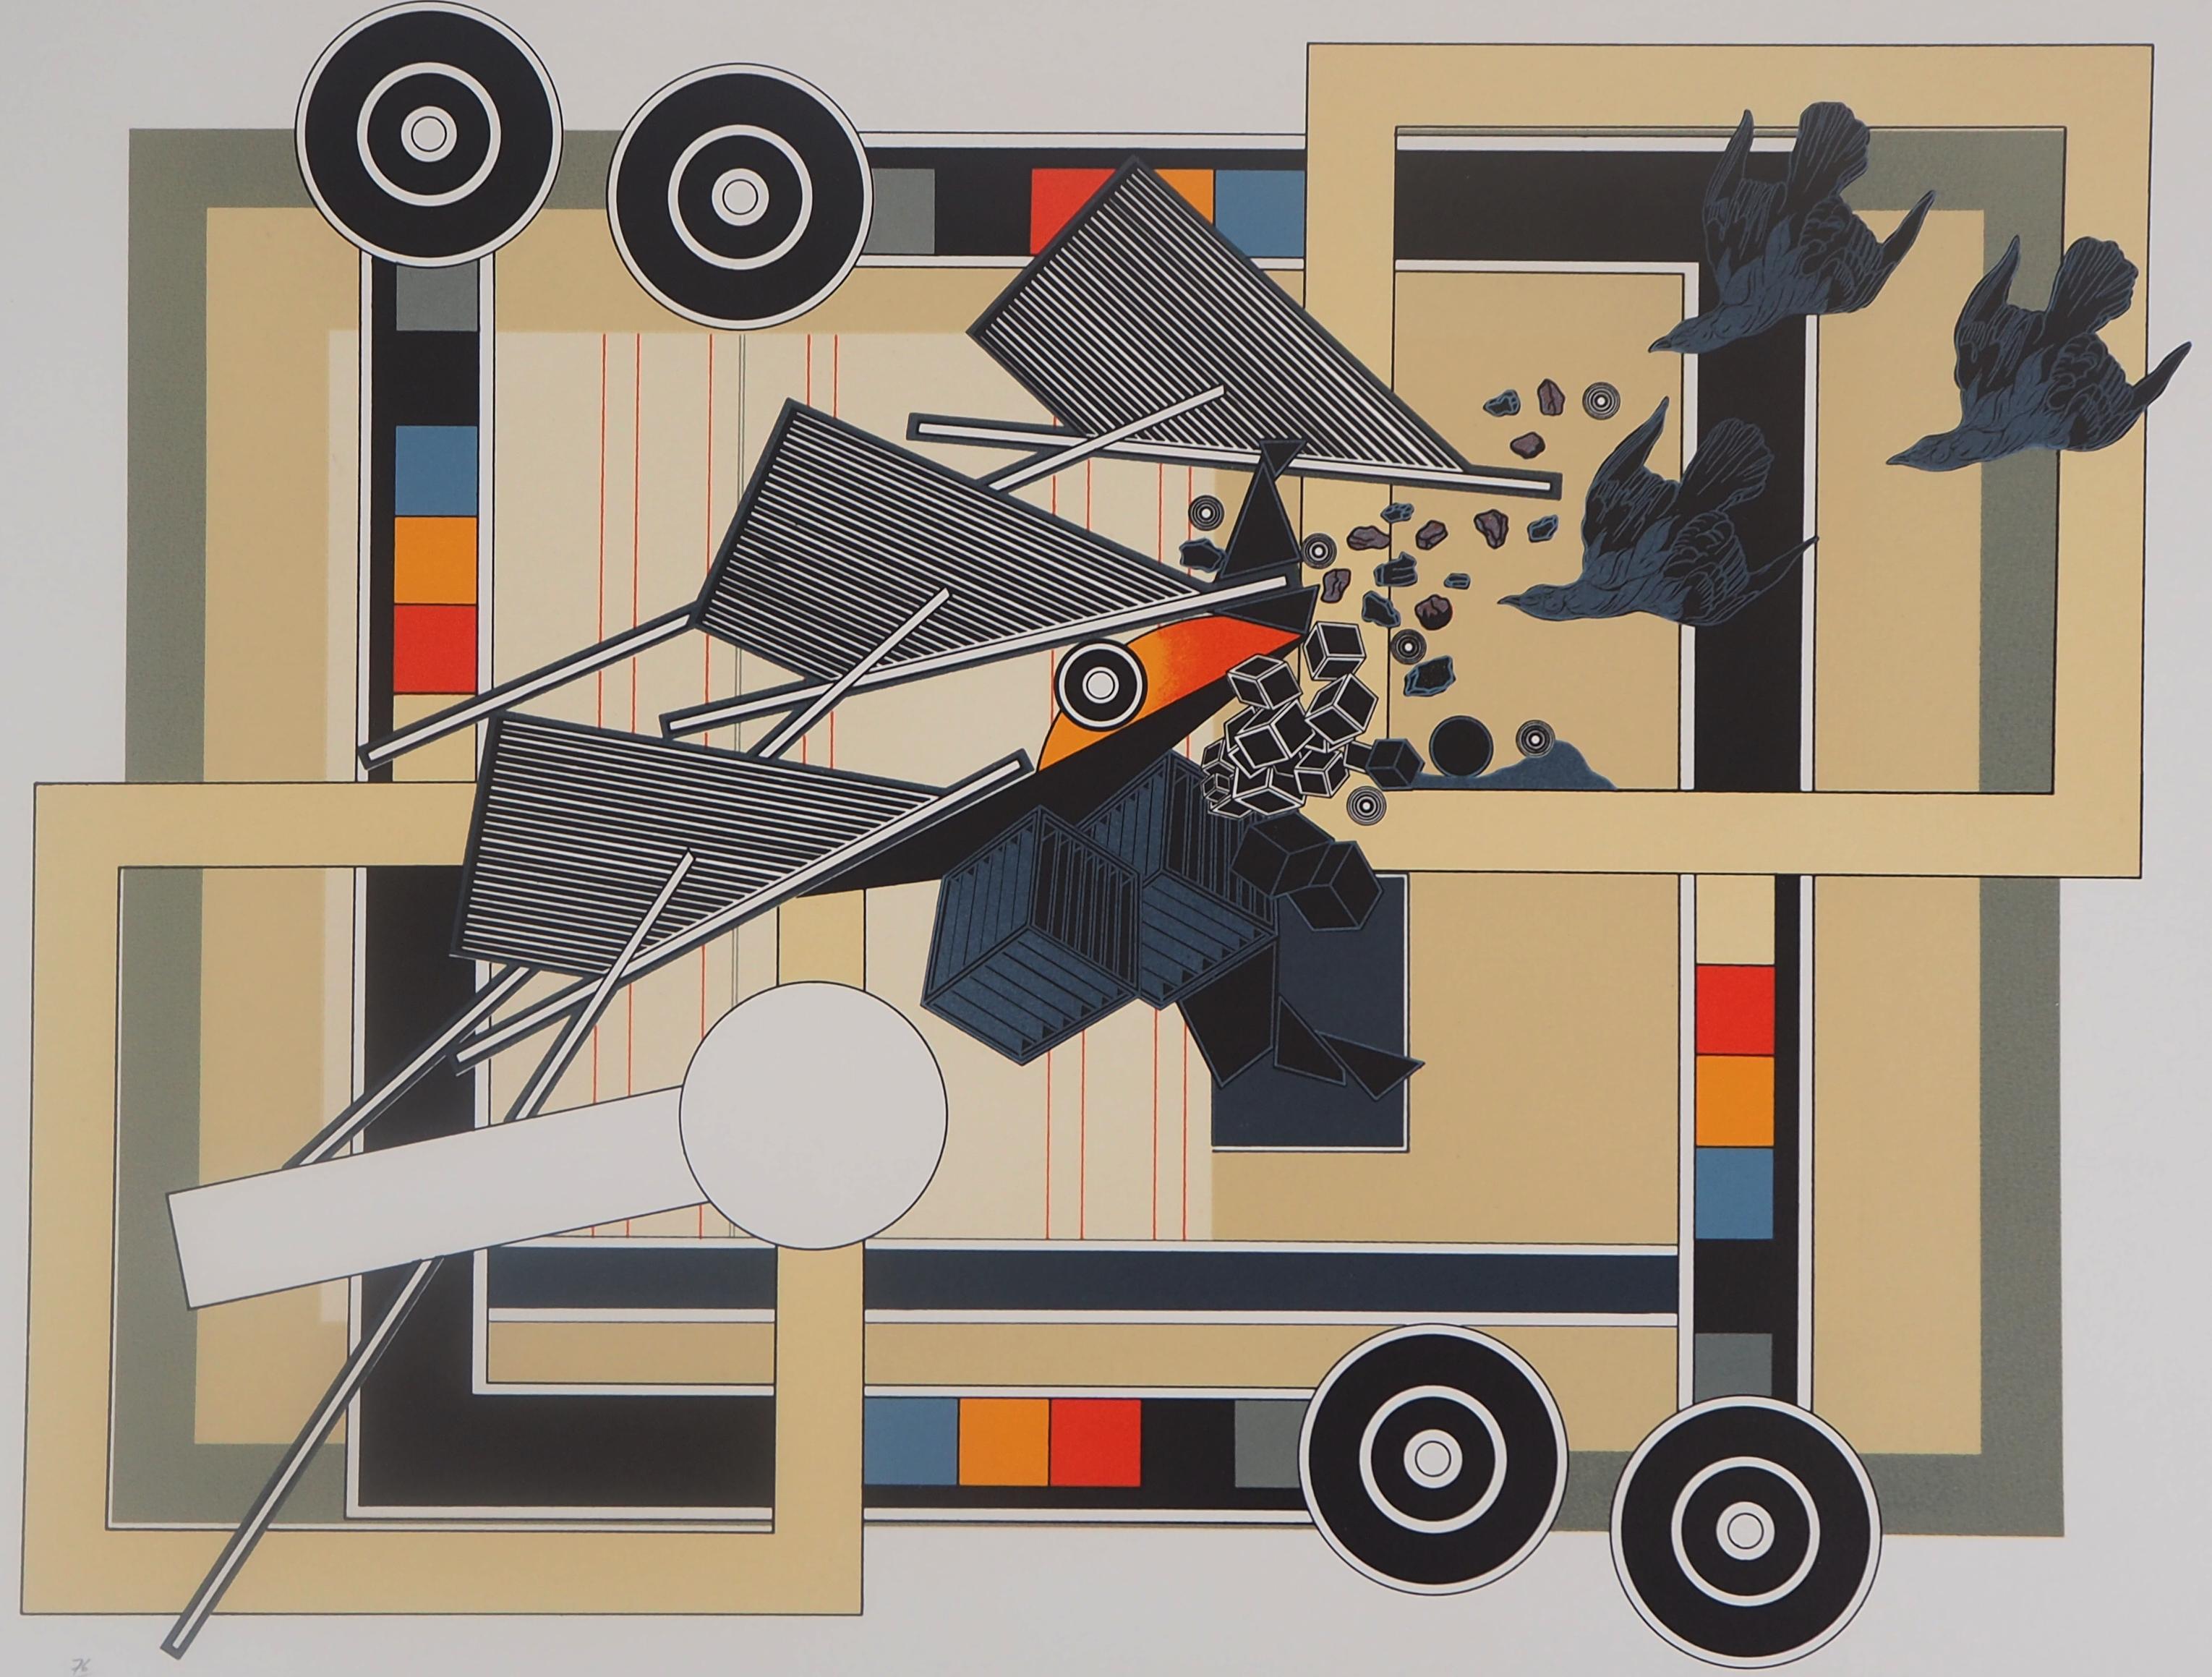 Tandem : Cinetic Compositon with Birds - Handsigned Original Lithograph - Print by Alain Le Yaouanc